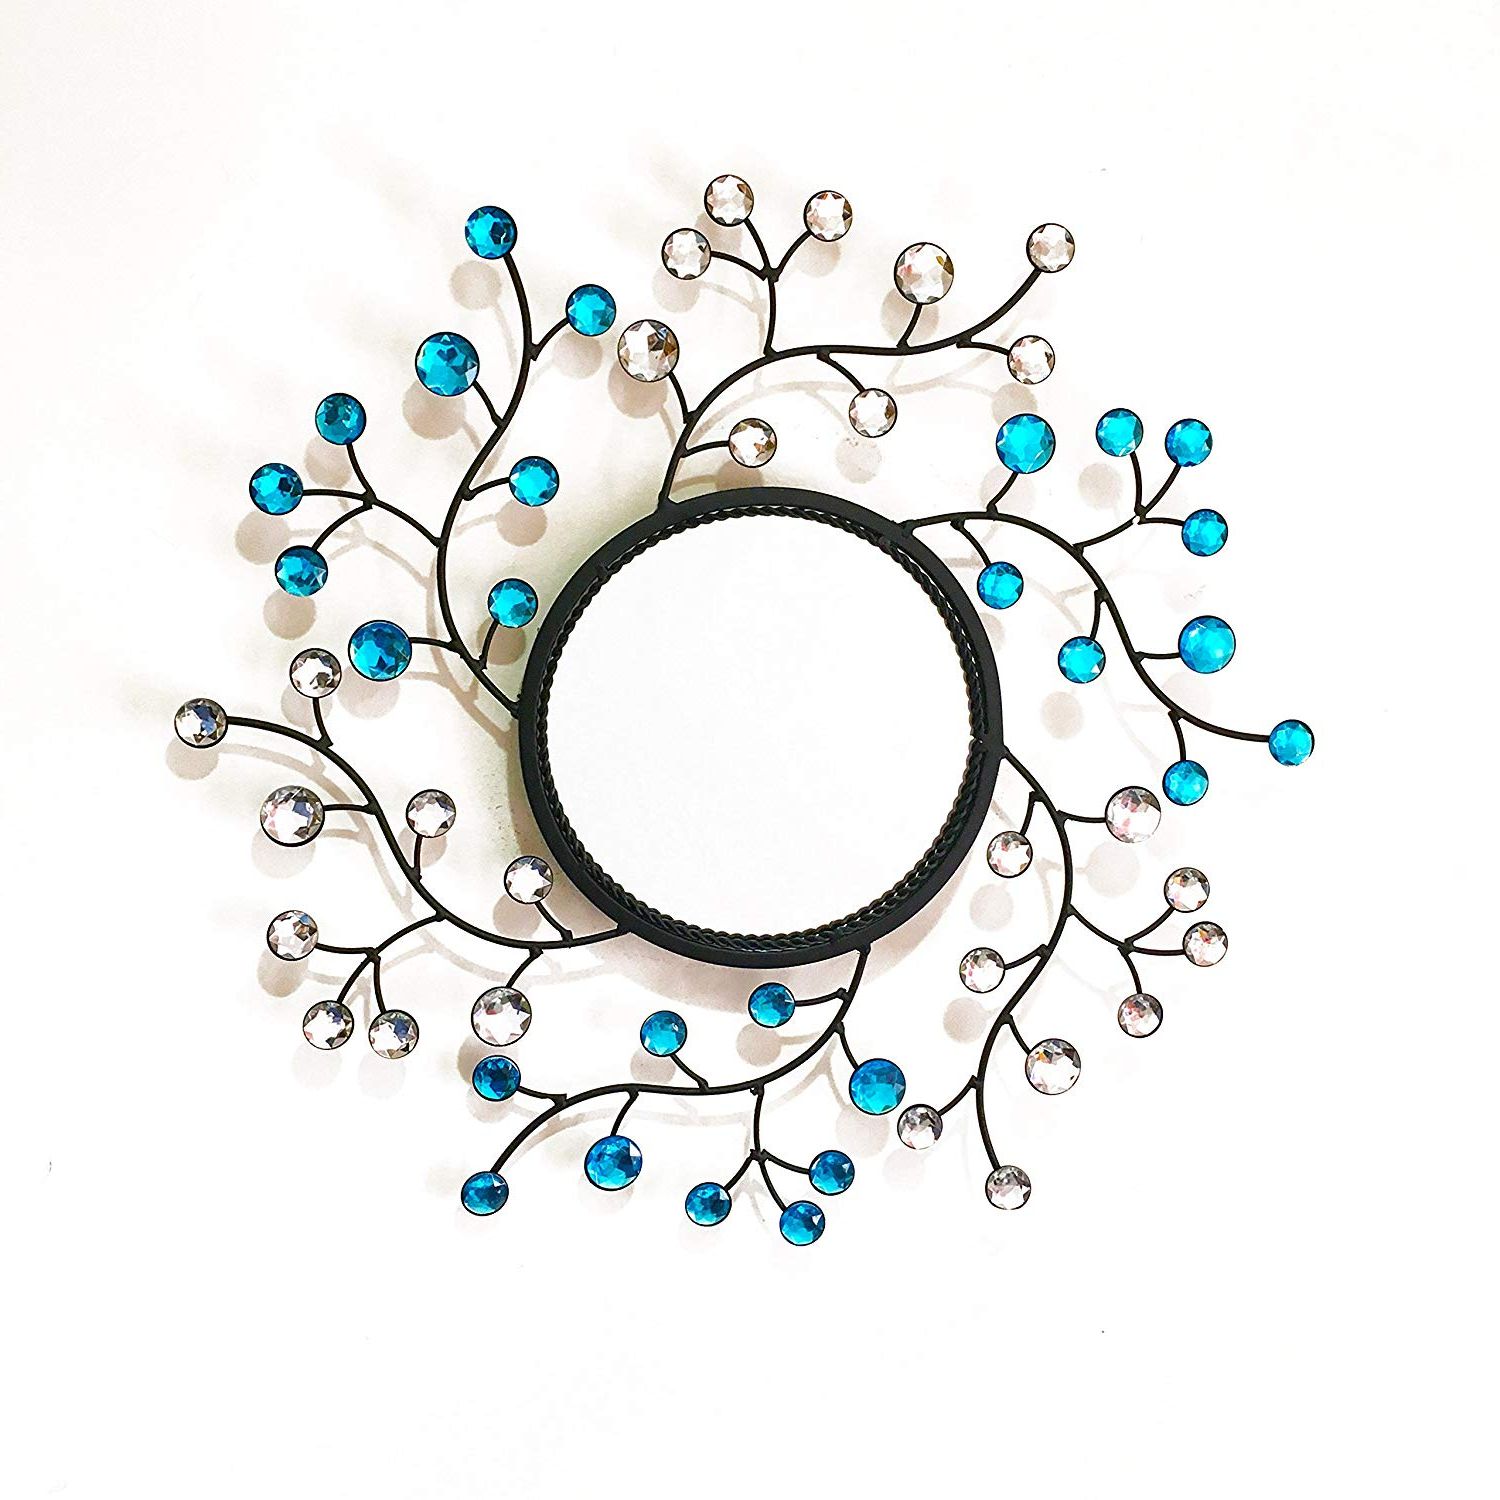 Wall Mirrors With Crystals Intended For Latest Metal Wall Mirror Leaf Shaped Diamond Accents Blue Crystals Flower  Decorative Hotel Mirror Bathroom Wall Mirror 20''inch (View 17 of 20)